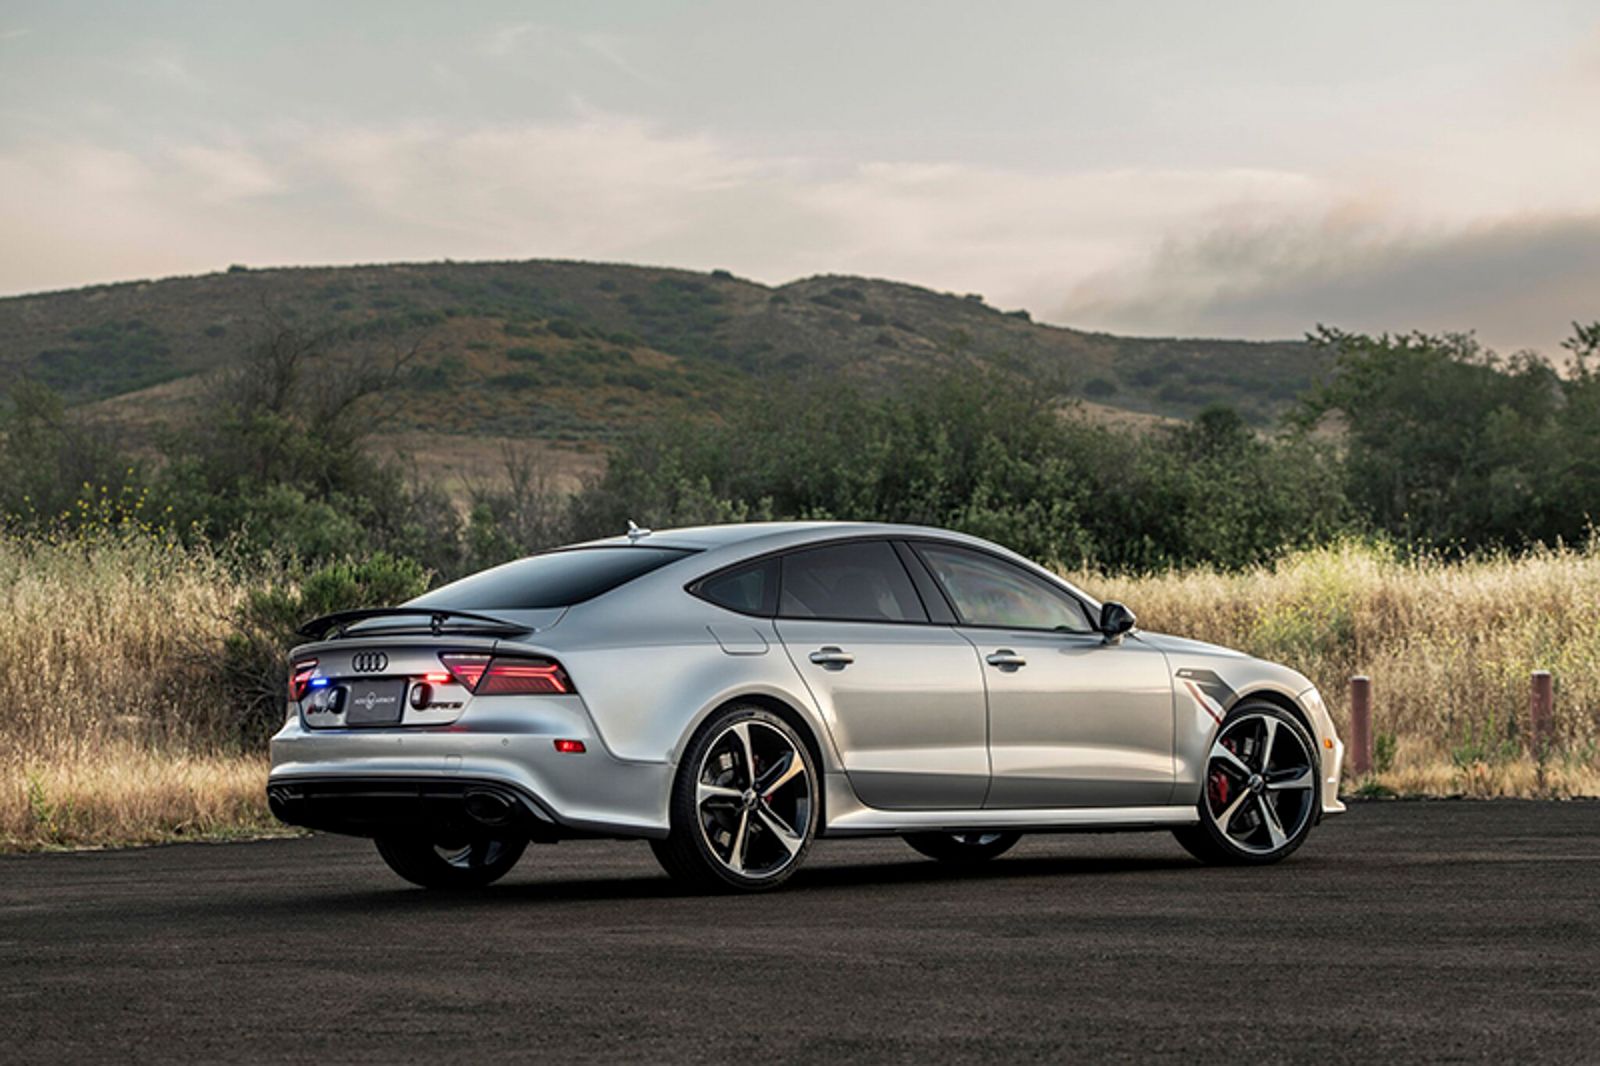 2019 Audi RS7 by AddArmor